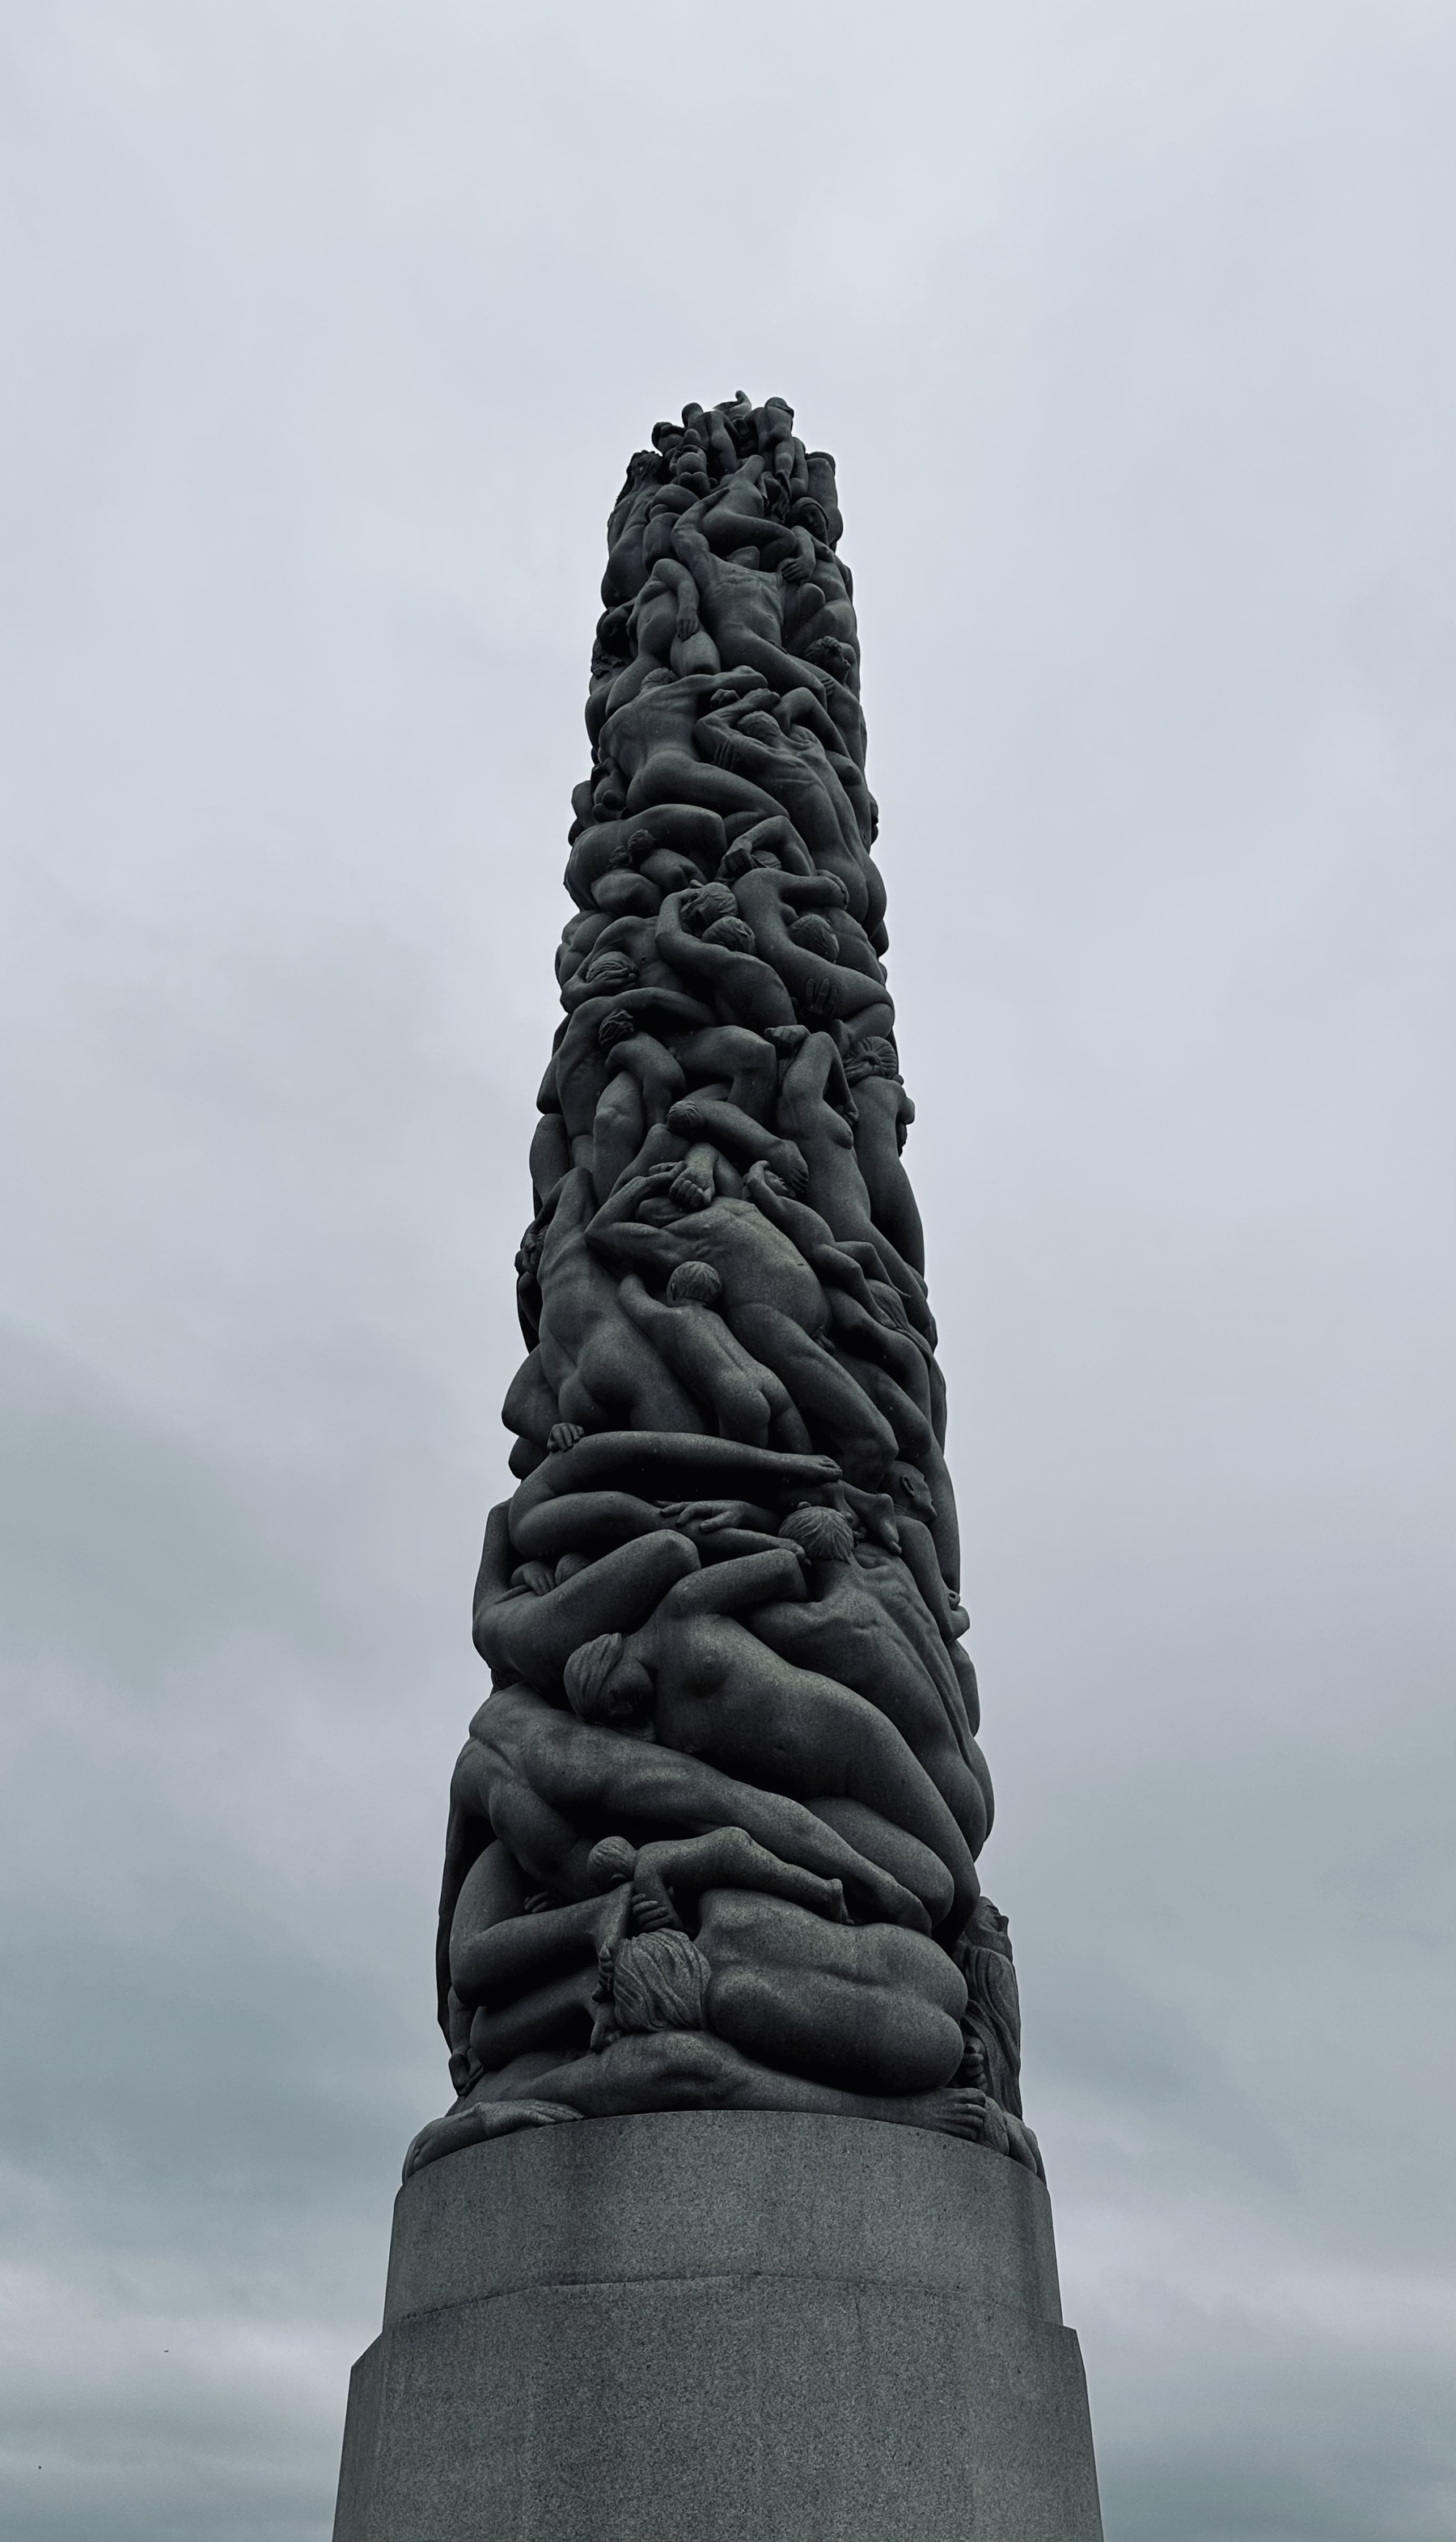 A carved stone pillar of nude figures against a grey sky.